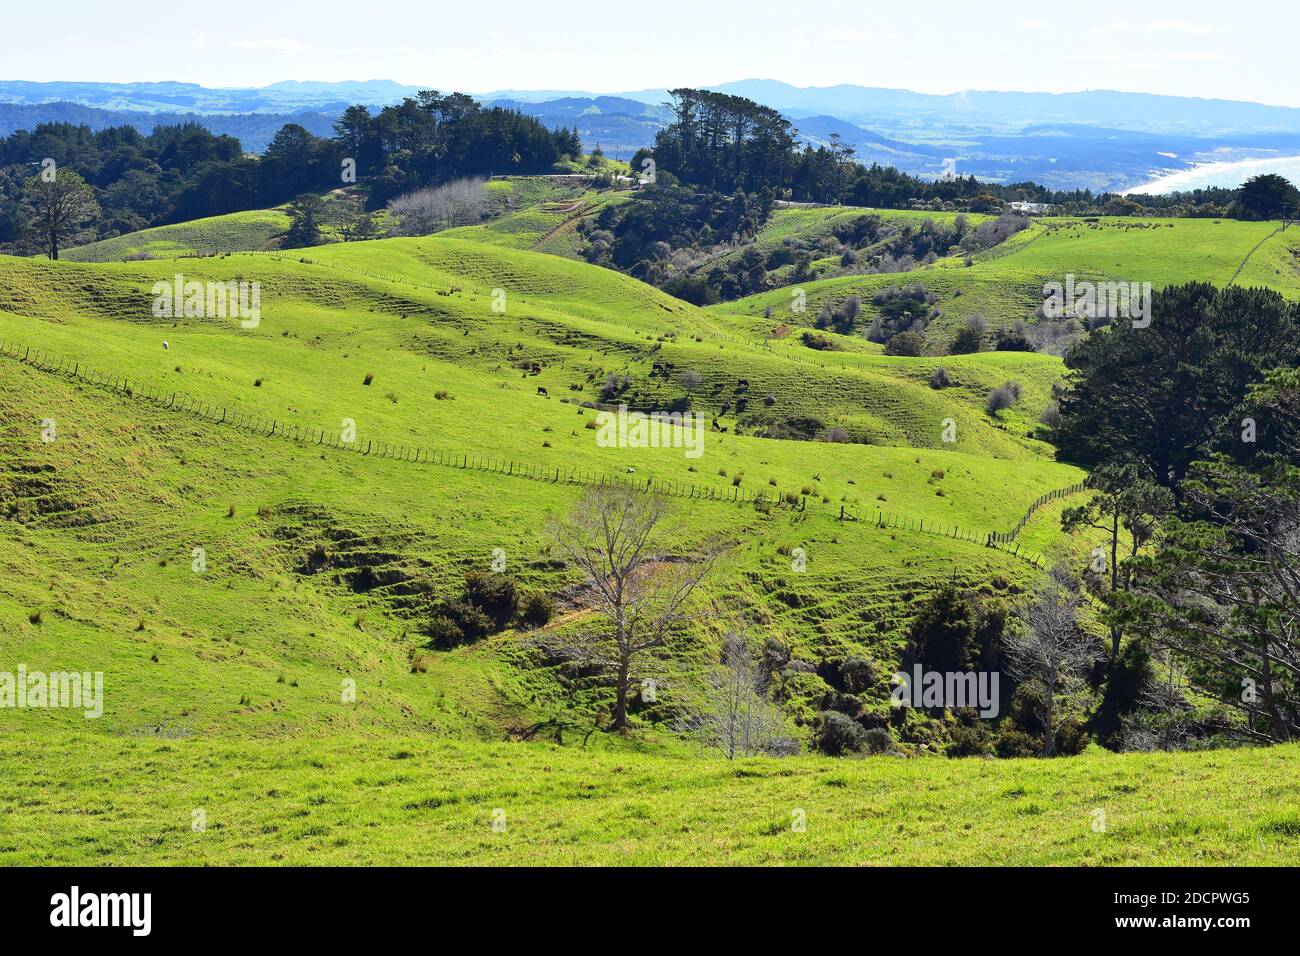 Vast fresh green pastures on hills of Mahurangi East with patches of conifer trees and recovering native bush. Stock Photo